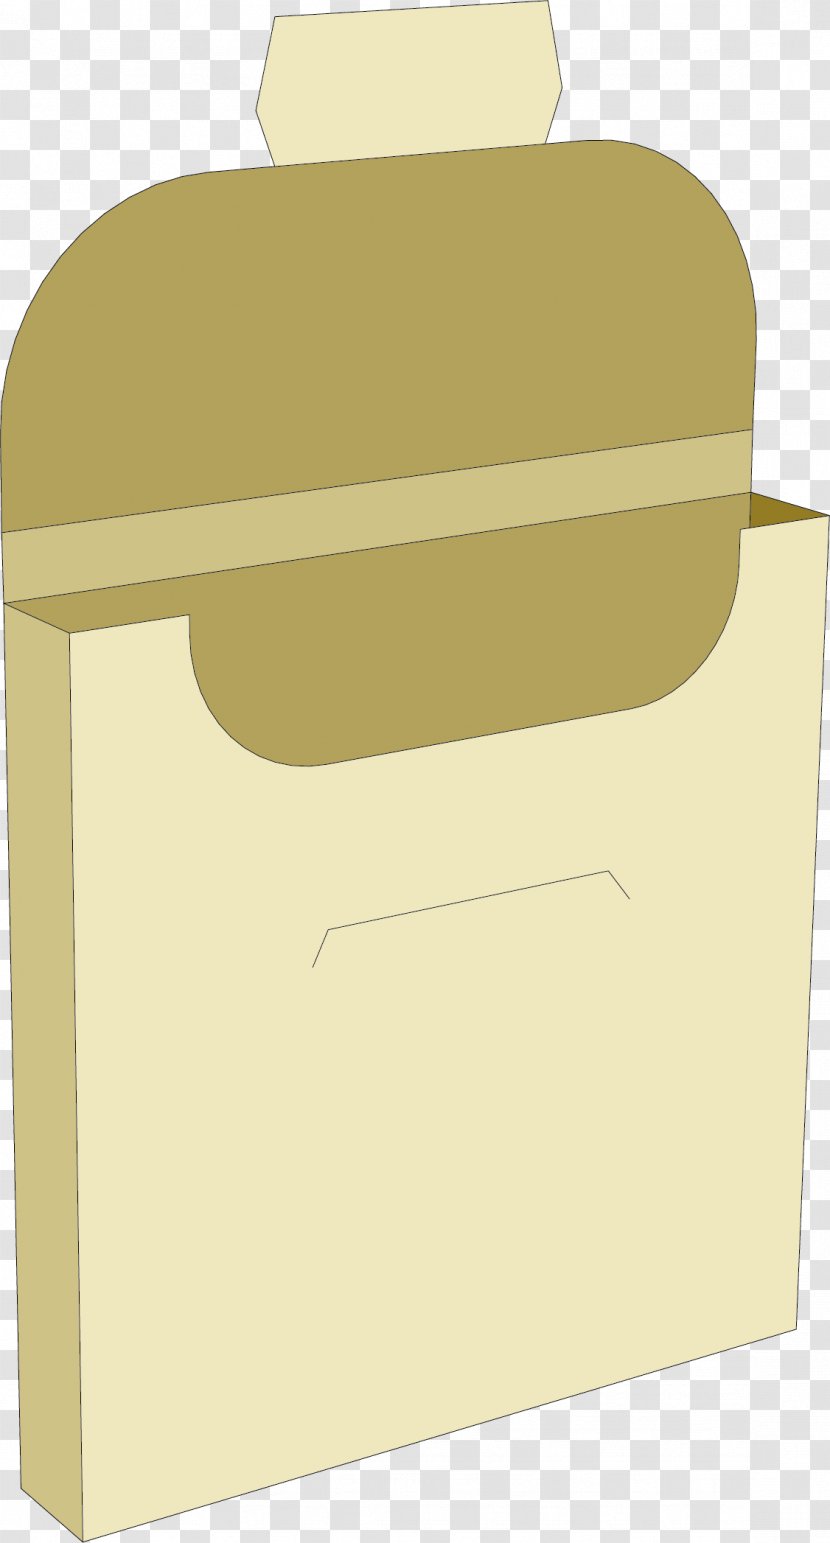 Icon - Threedimensional Space - Approval Box Transparent PNG